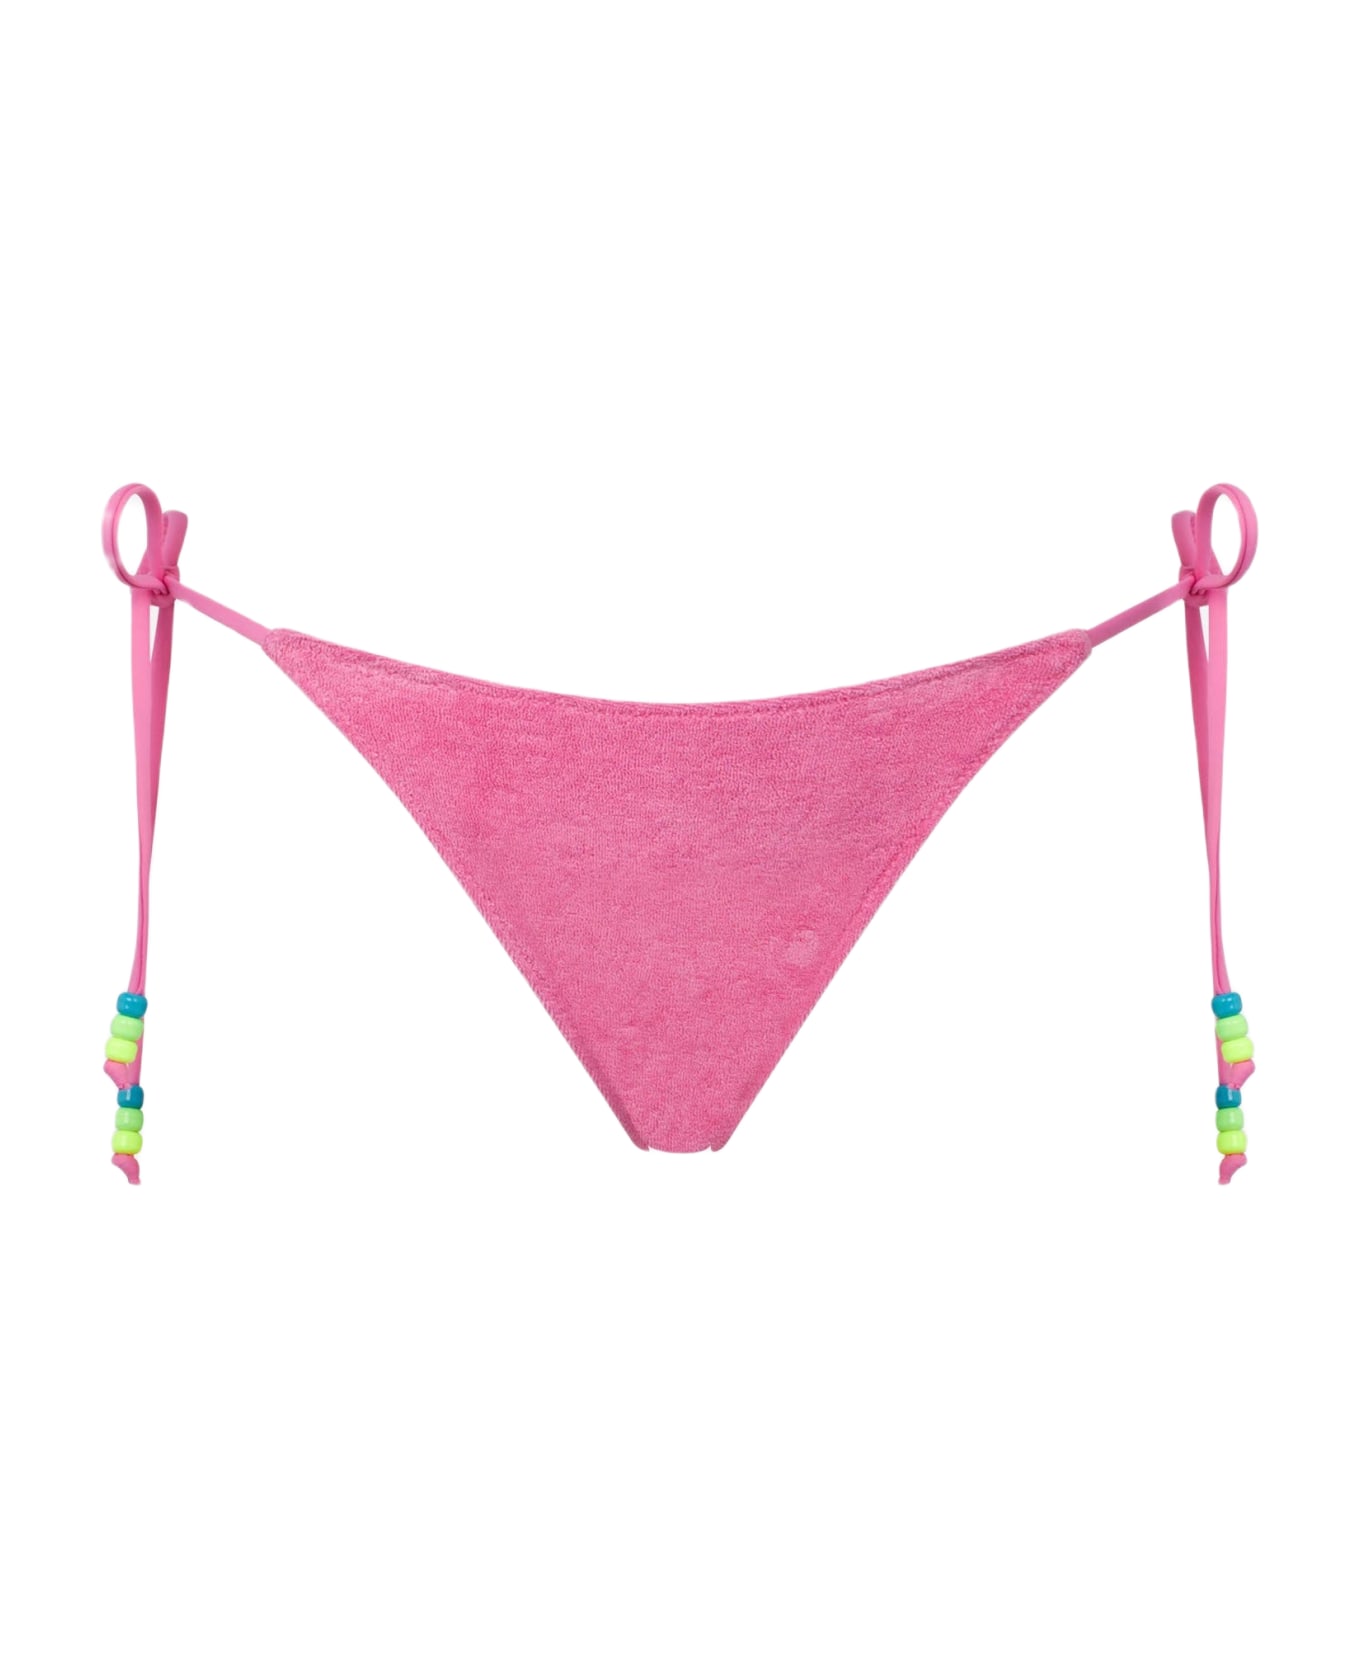 MC2 Saint Barth Woman Pink Terry Swim Briefs With Side Laces - WHITE ボトムス